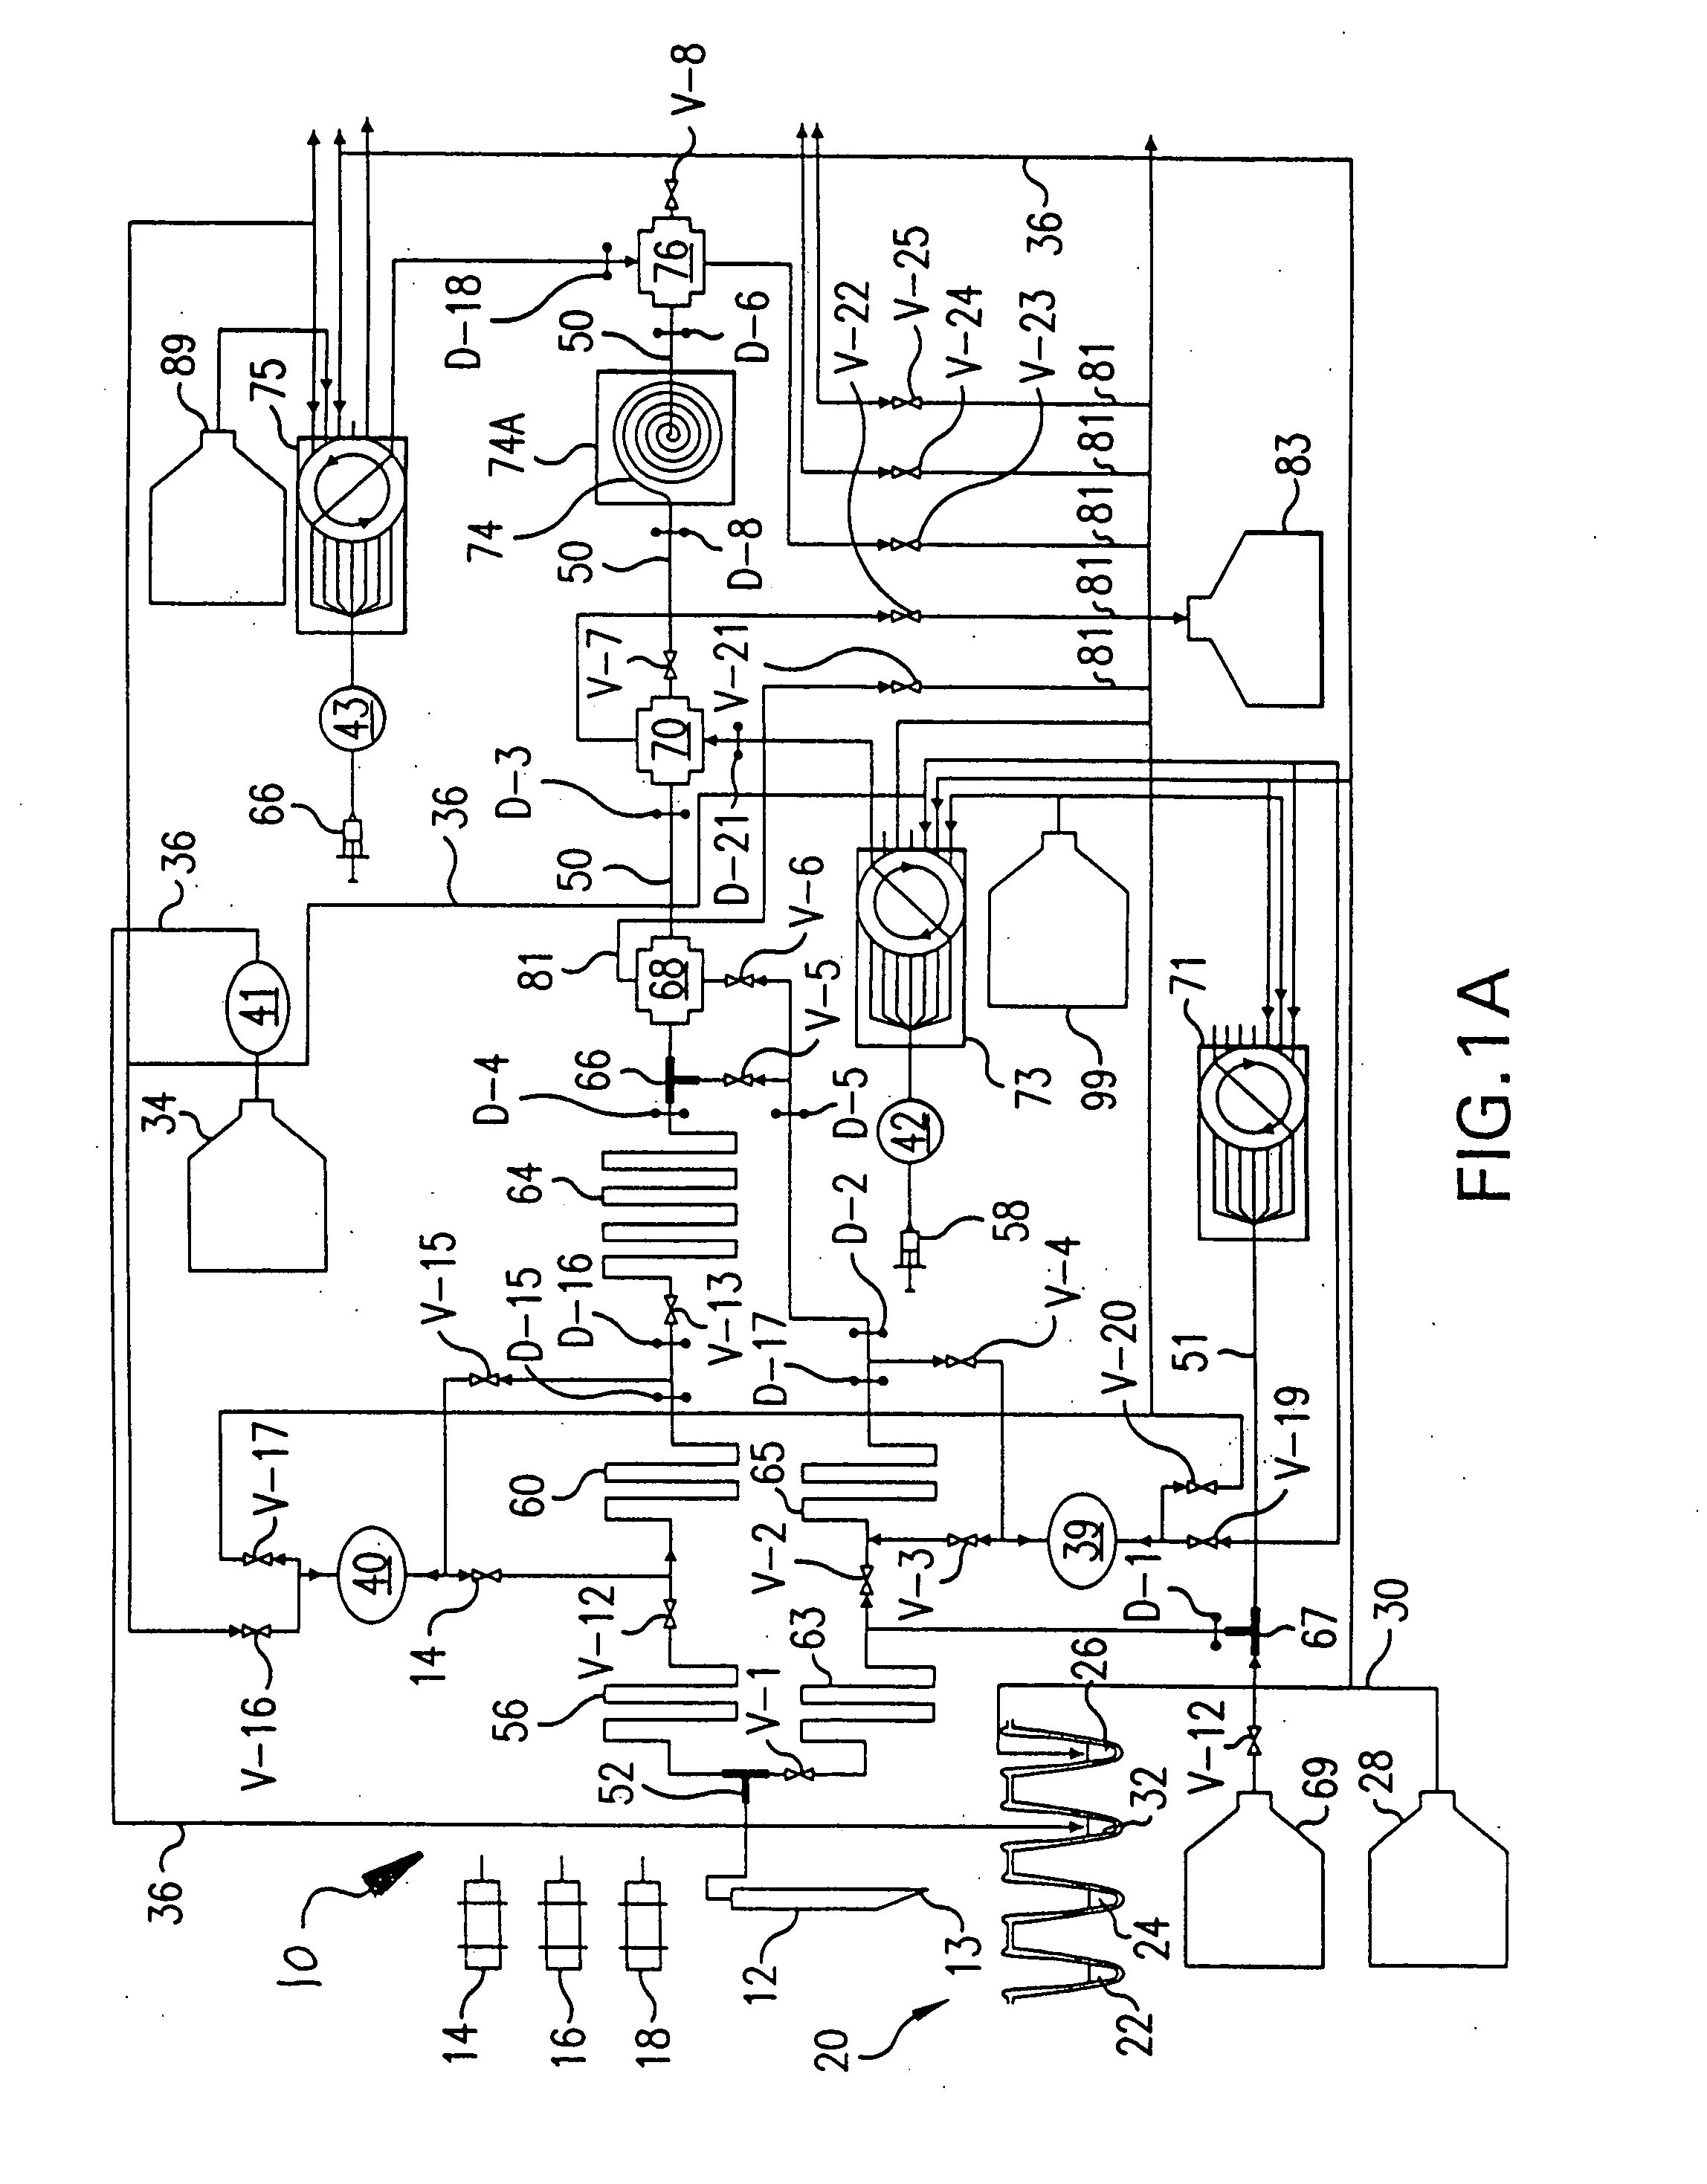 Device, system, and method for depositing processed immiscible-fluid-discrete-volumes